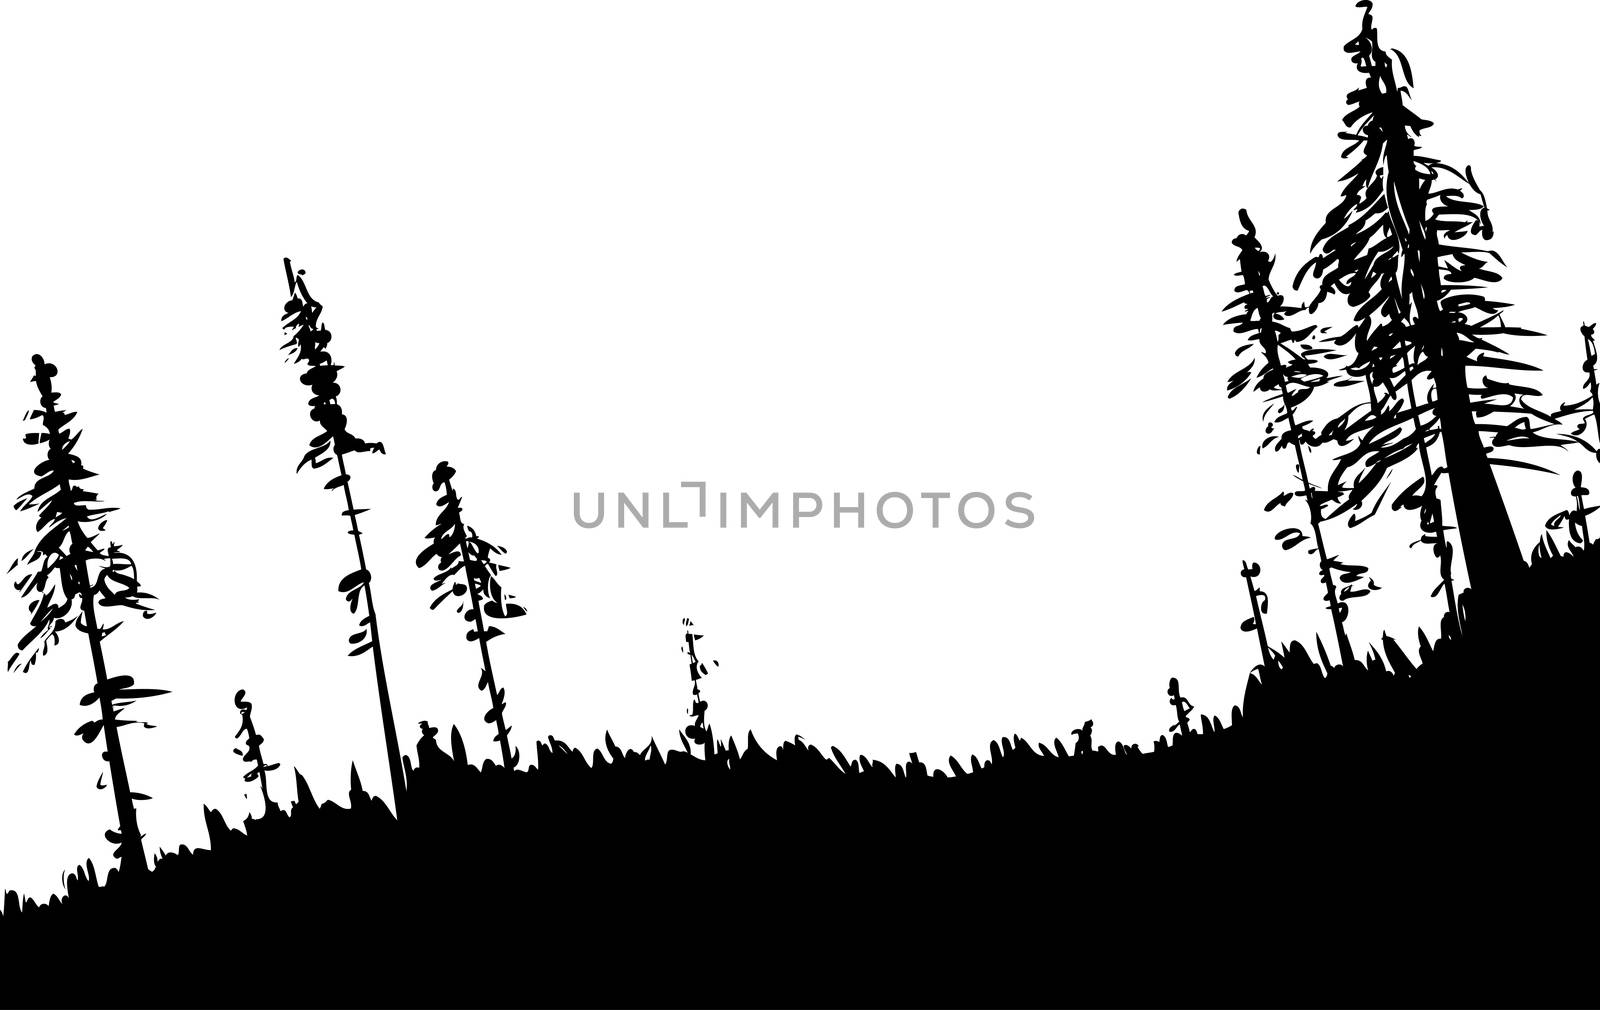 Back-lit illustration of Swedish forest woodland from low angle as nature background